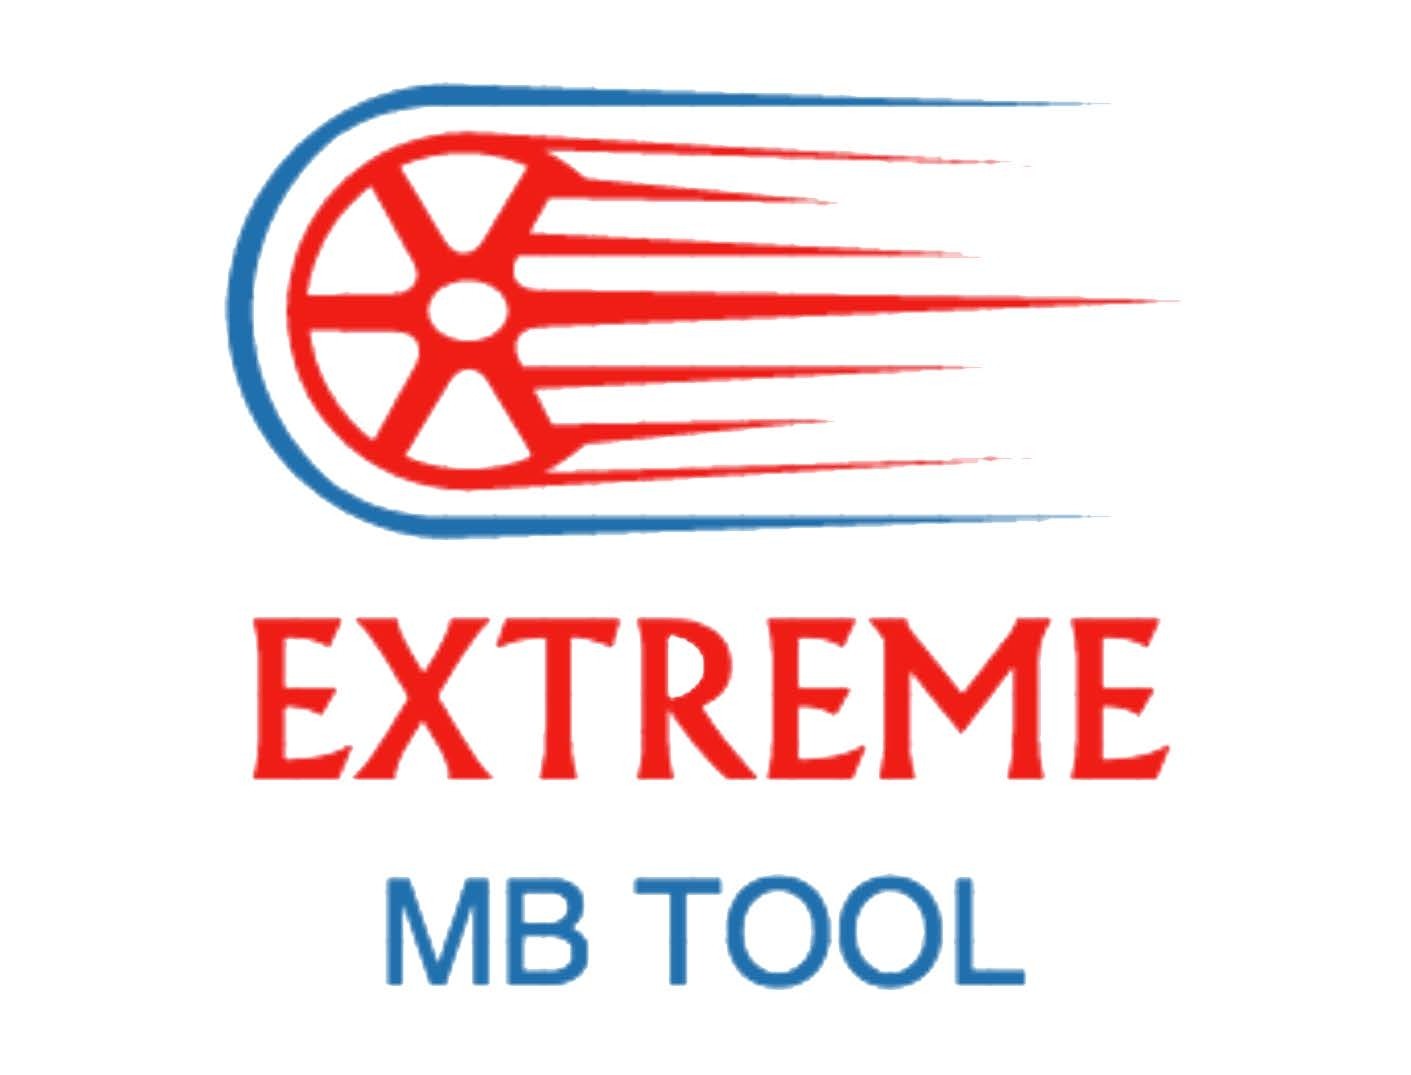 EXTREME MB TOOL